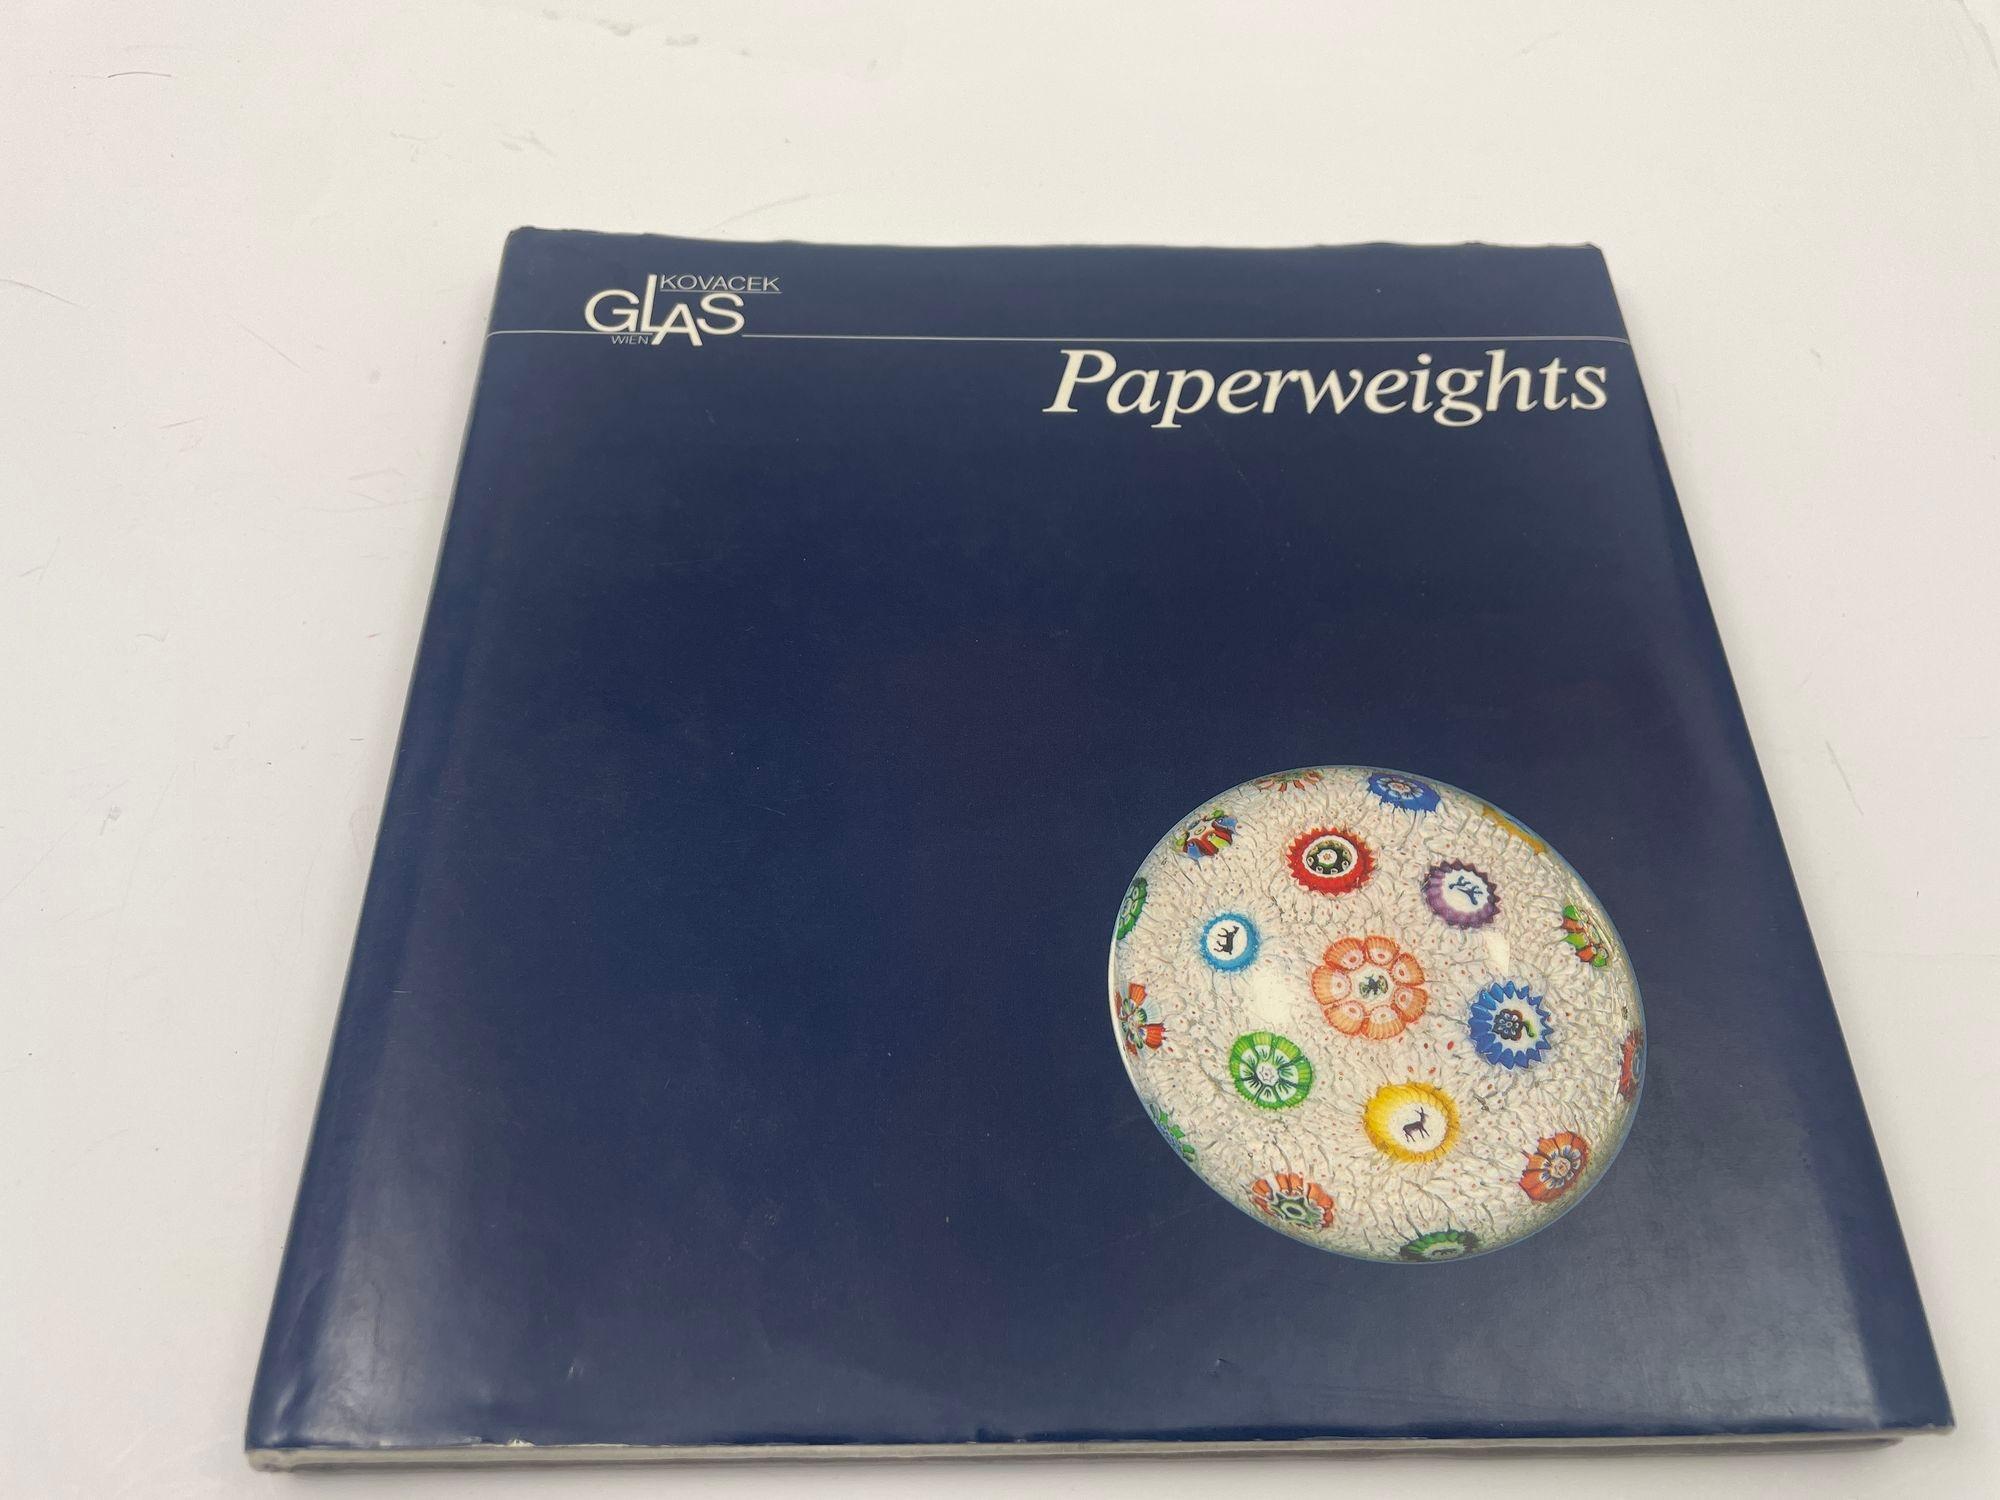 Post-Modern Paperweights Glass Gallery Michael Kovacek Vienna 1987 Hardcover Reference Book For Sale